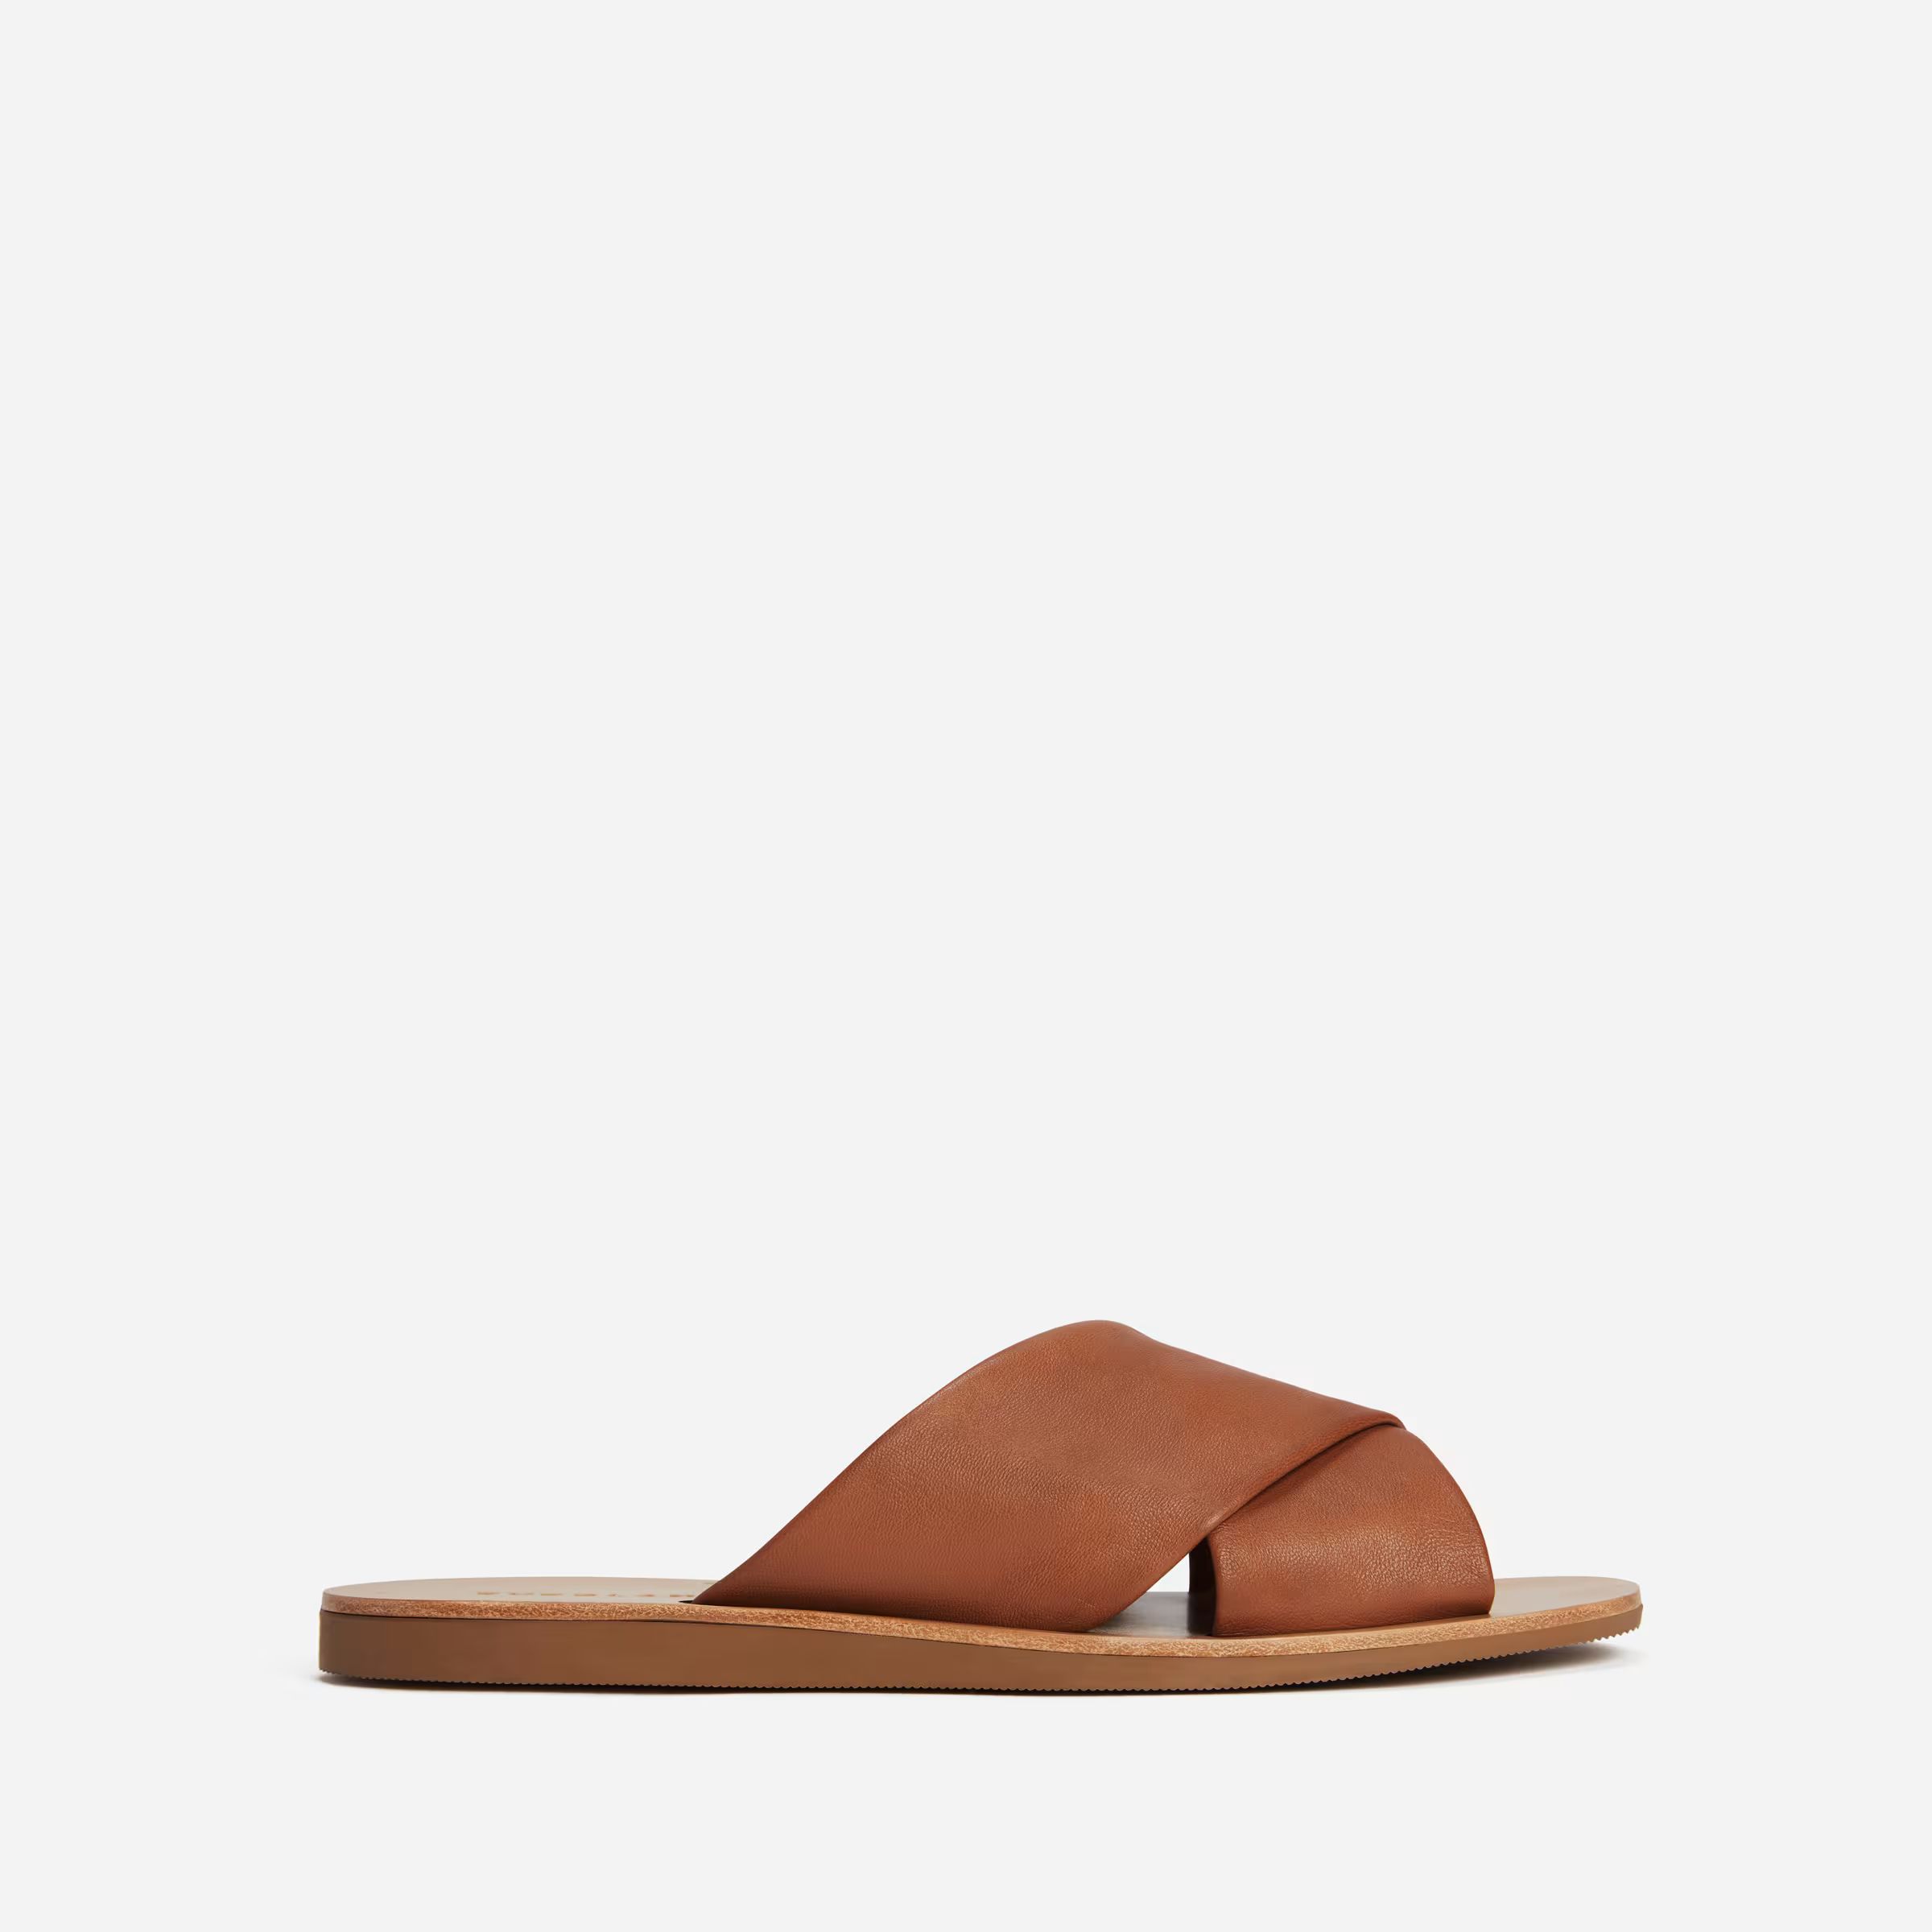 The Day Crossover Sandal$98 | Everlane